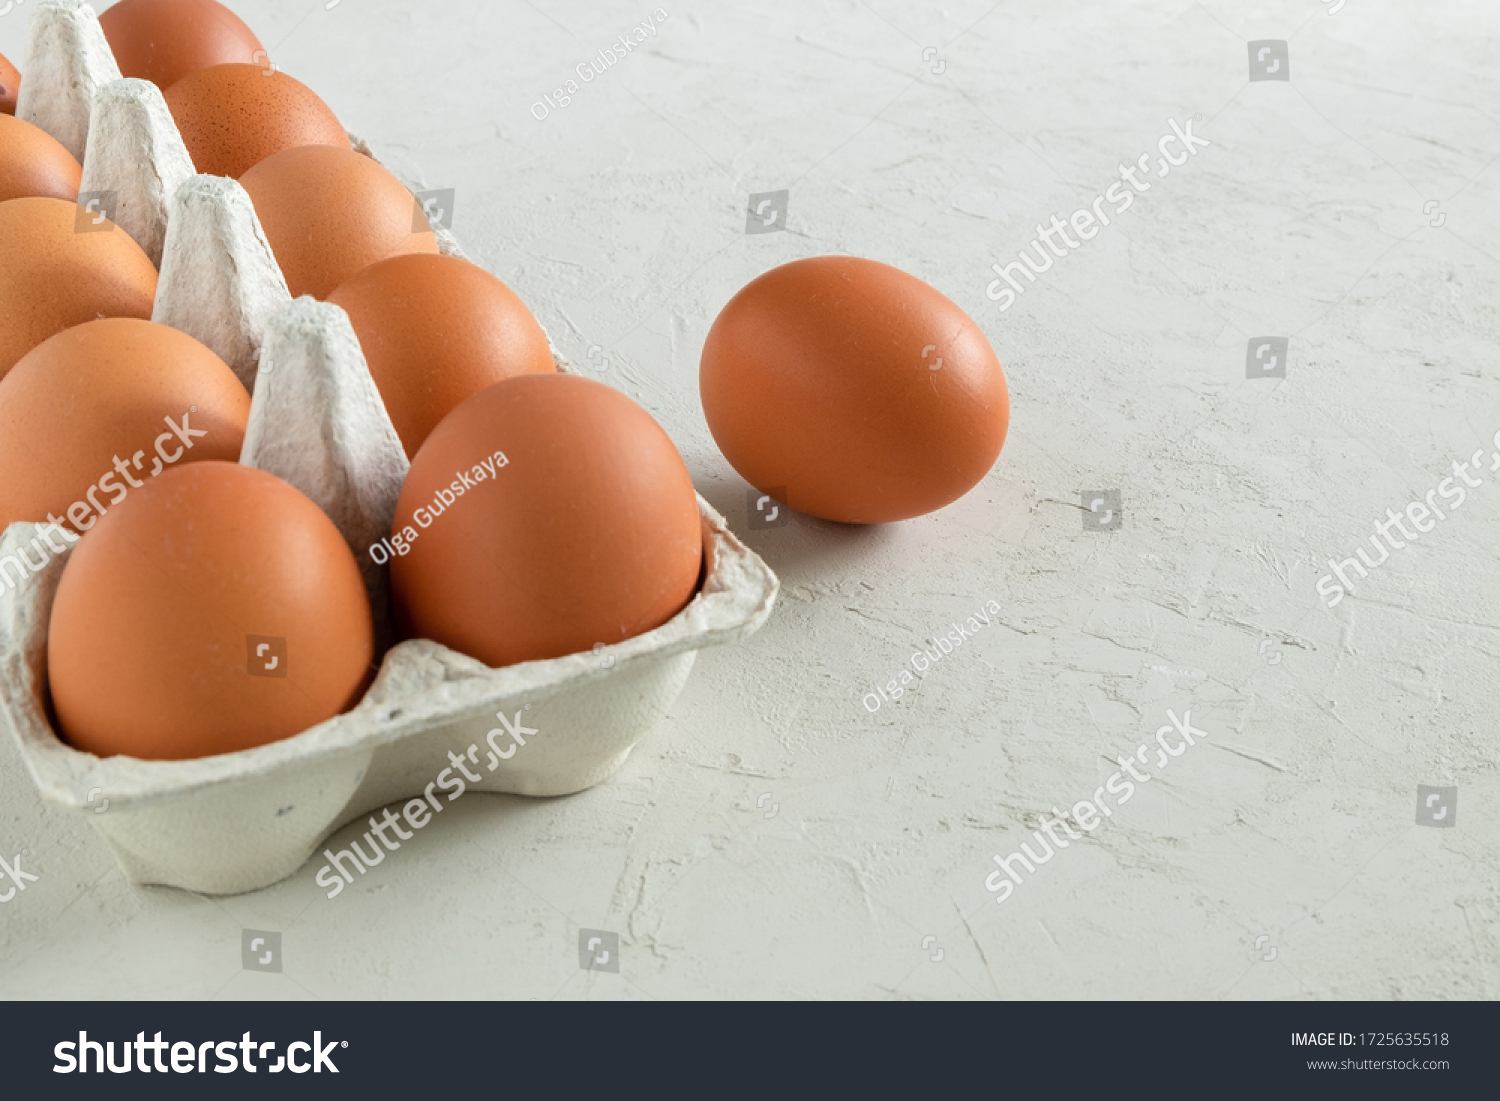 Chicken brown fresh raw eggs in an egg container. Ingredients for cooking. Healthy eating is a concept. Horizontal orientation, selective focus. #1725635518